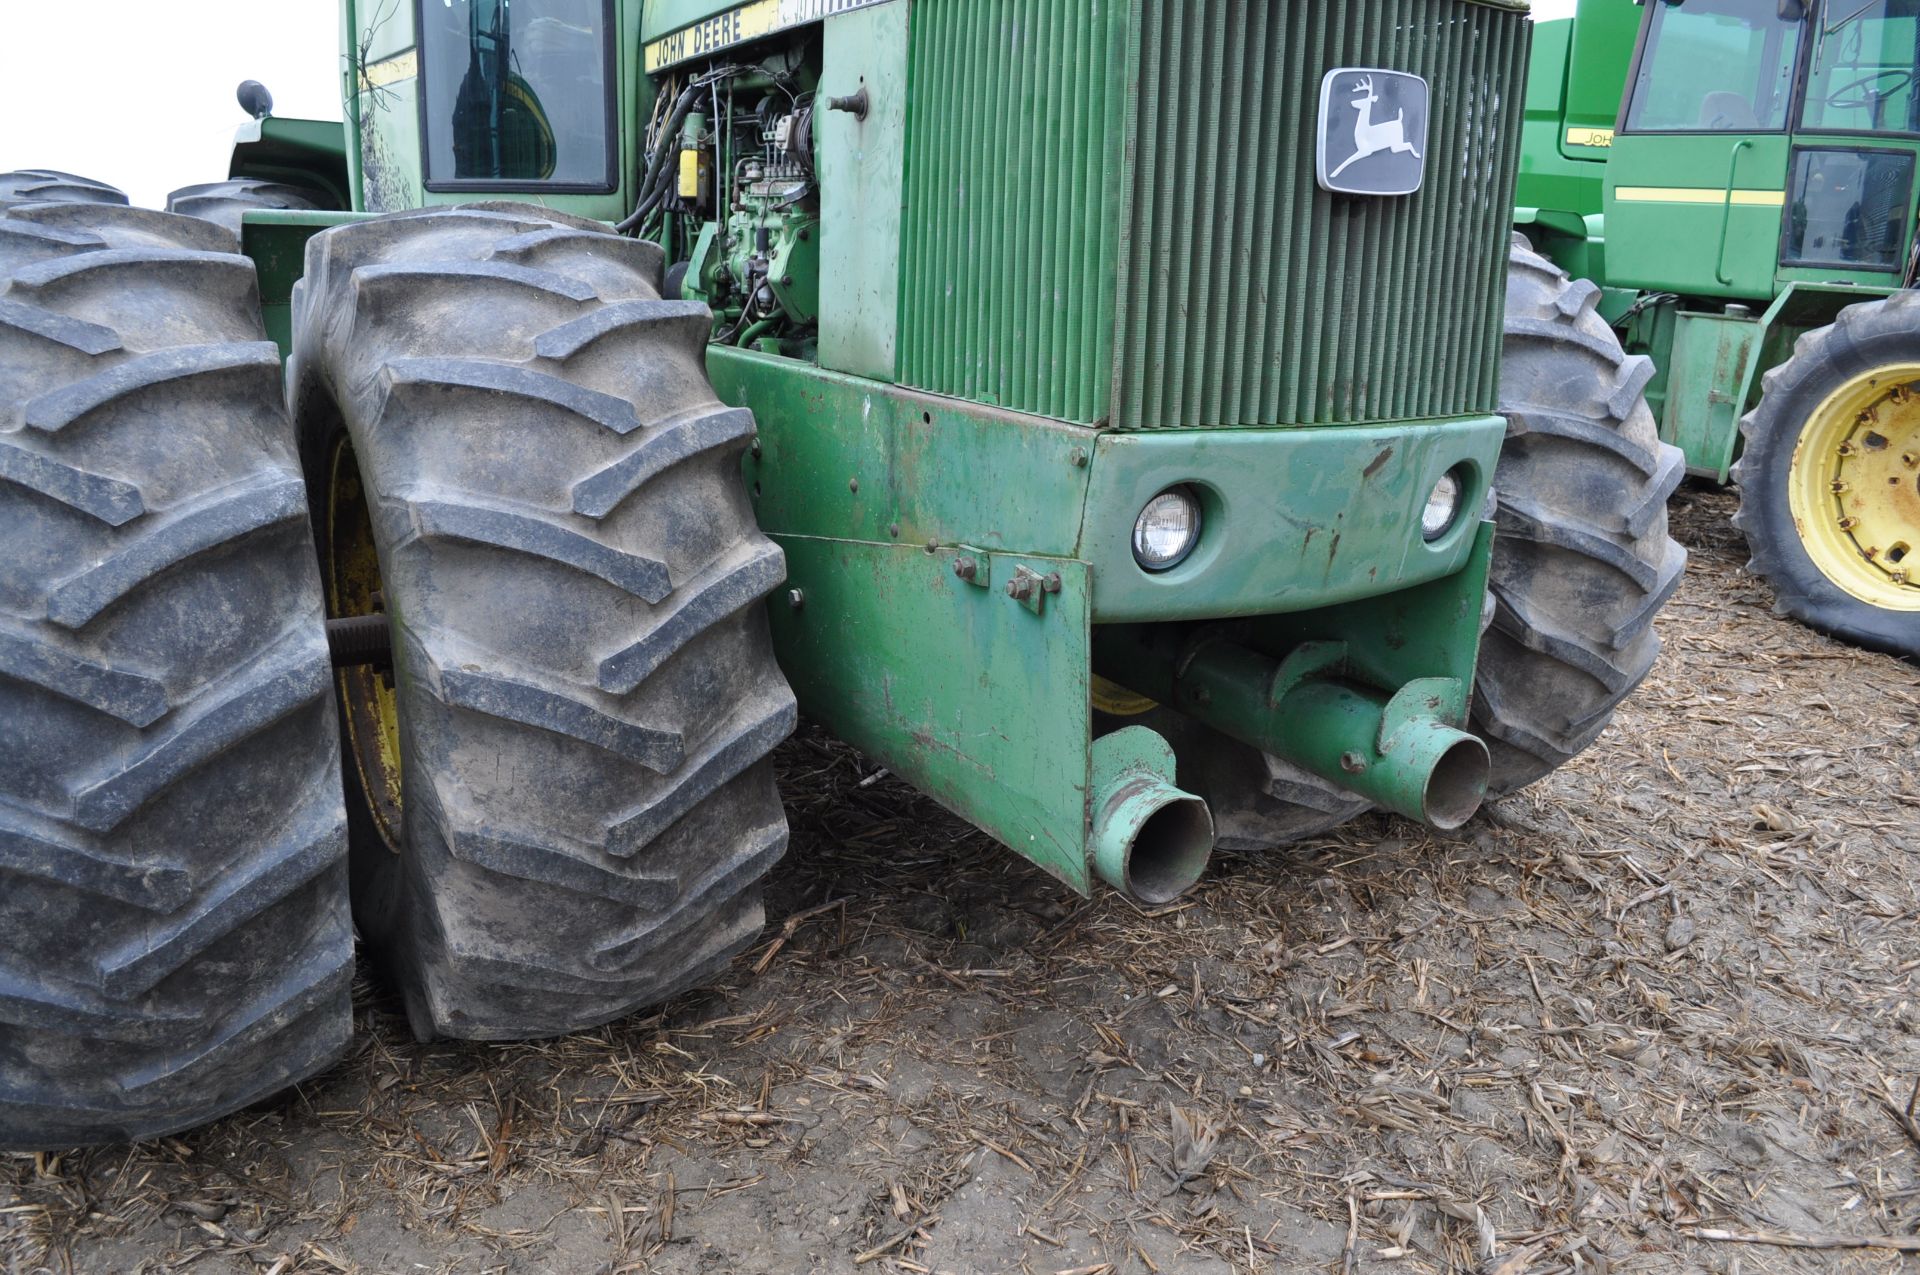 John Deere 8630 4WD tractor, 23.1-30 duals, 3 hyd remotes, 3 pt, quick hitch, 1000 PTO - Image 17 of 30